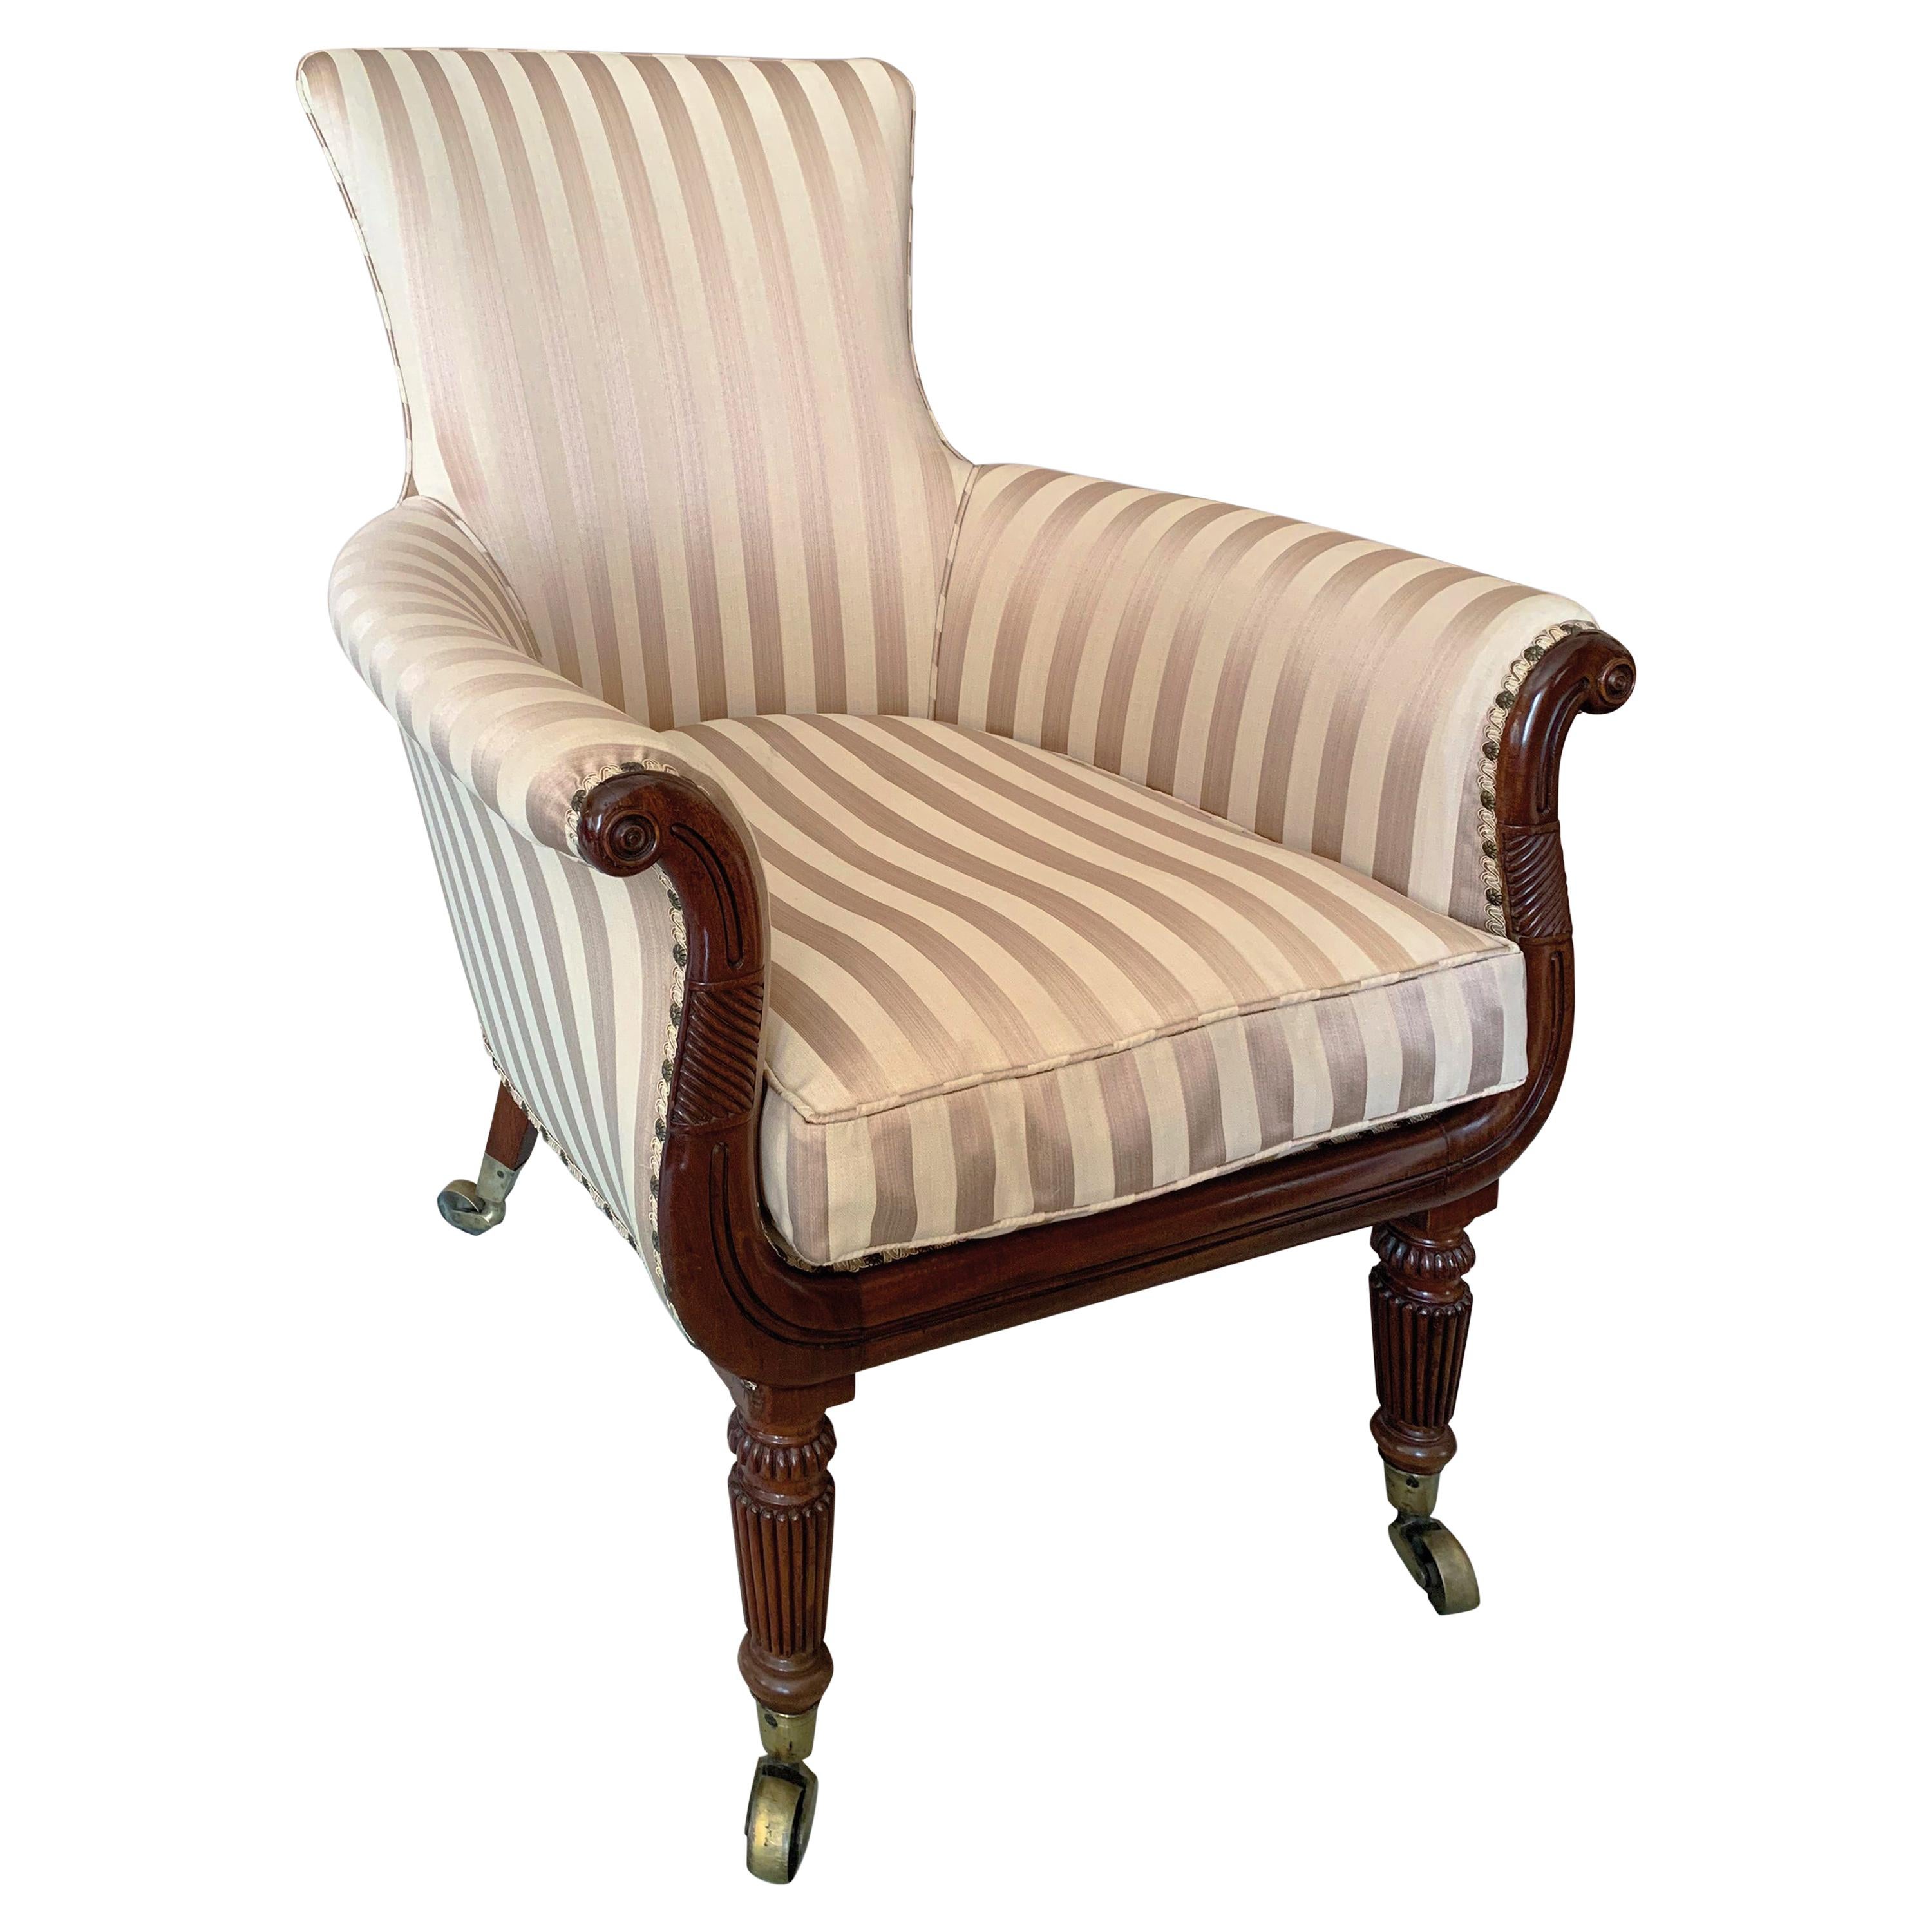 19th Century Regency Period Mahogany Lyre Front Gillows Tub Chair For Sale